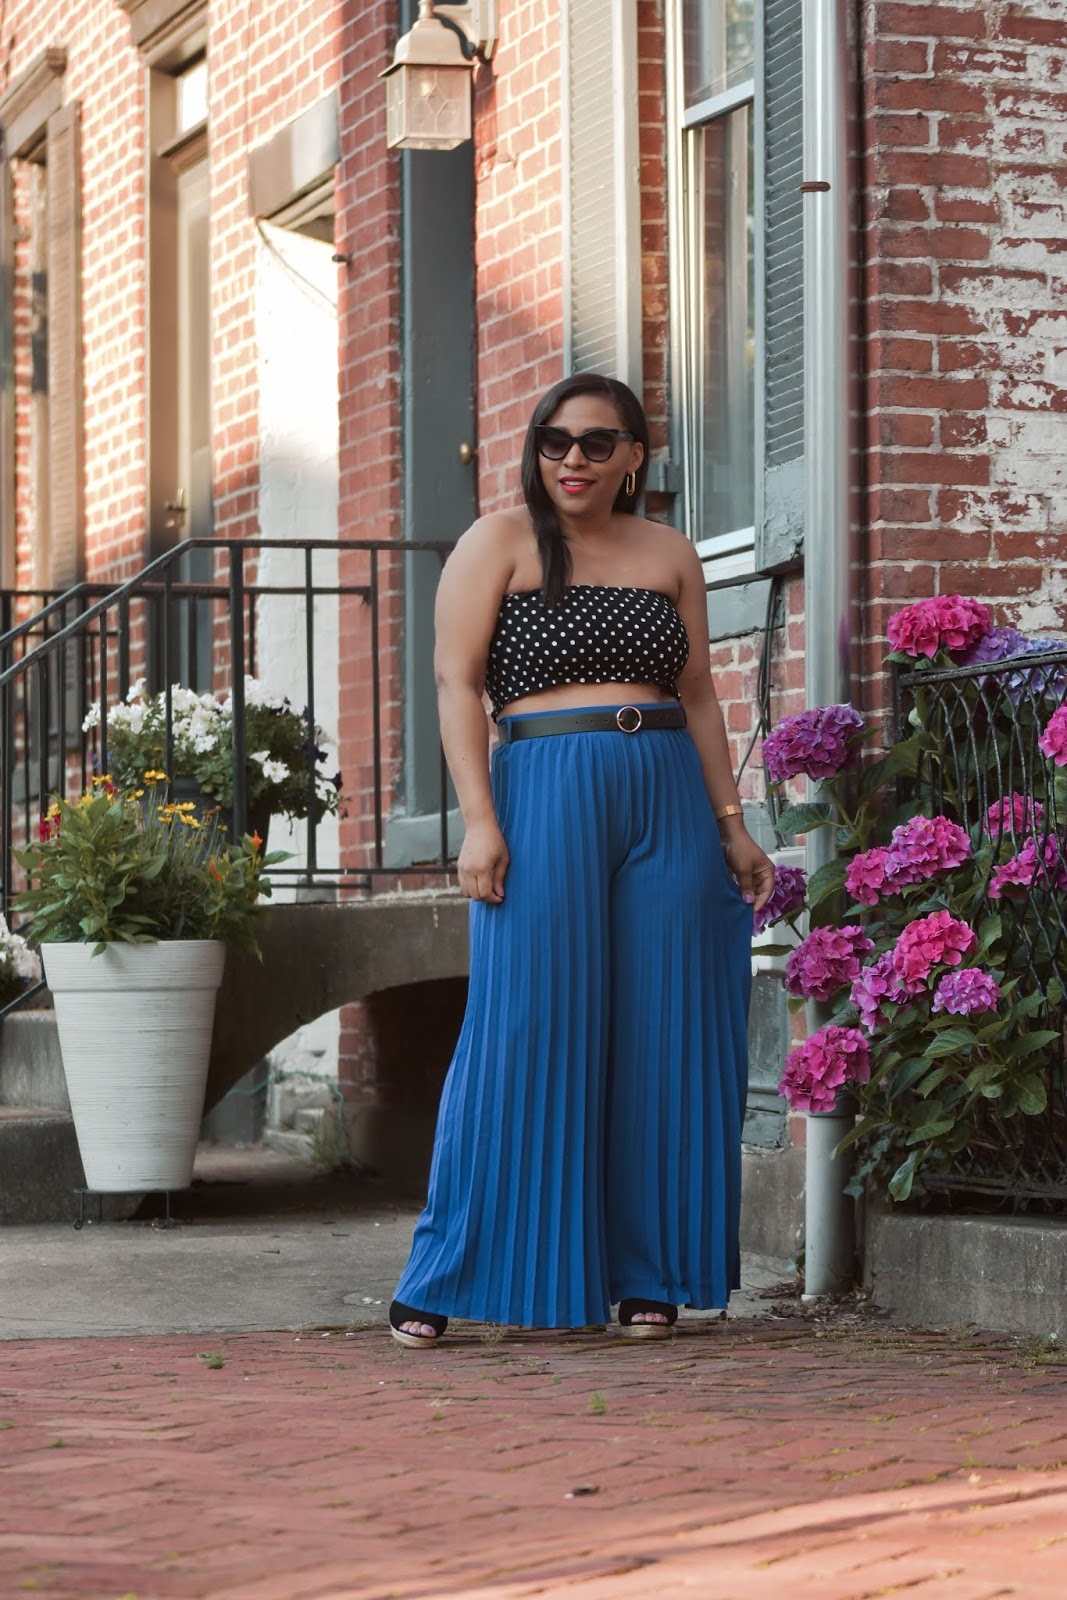 pattys kloset, shein, shein reviews, how to style pleated pants, pleated pants outfit ideas, summer outfit ideas, chic summer outfits